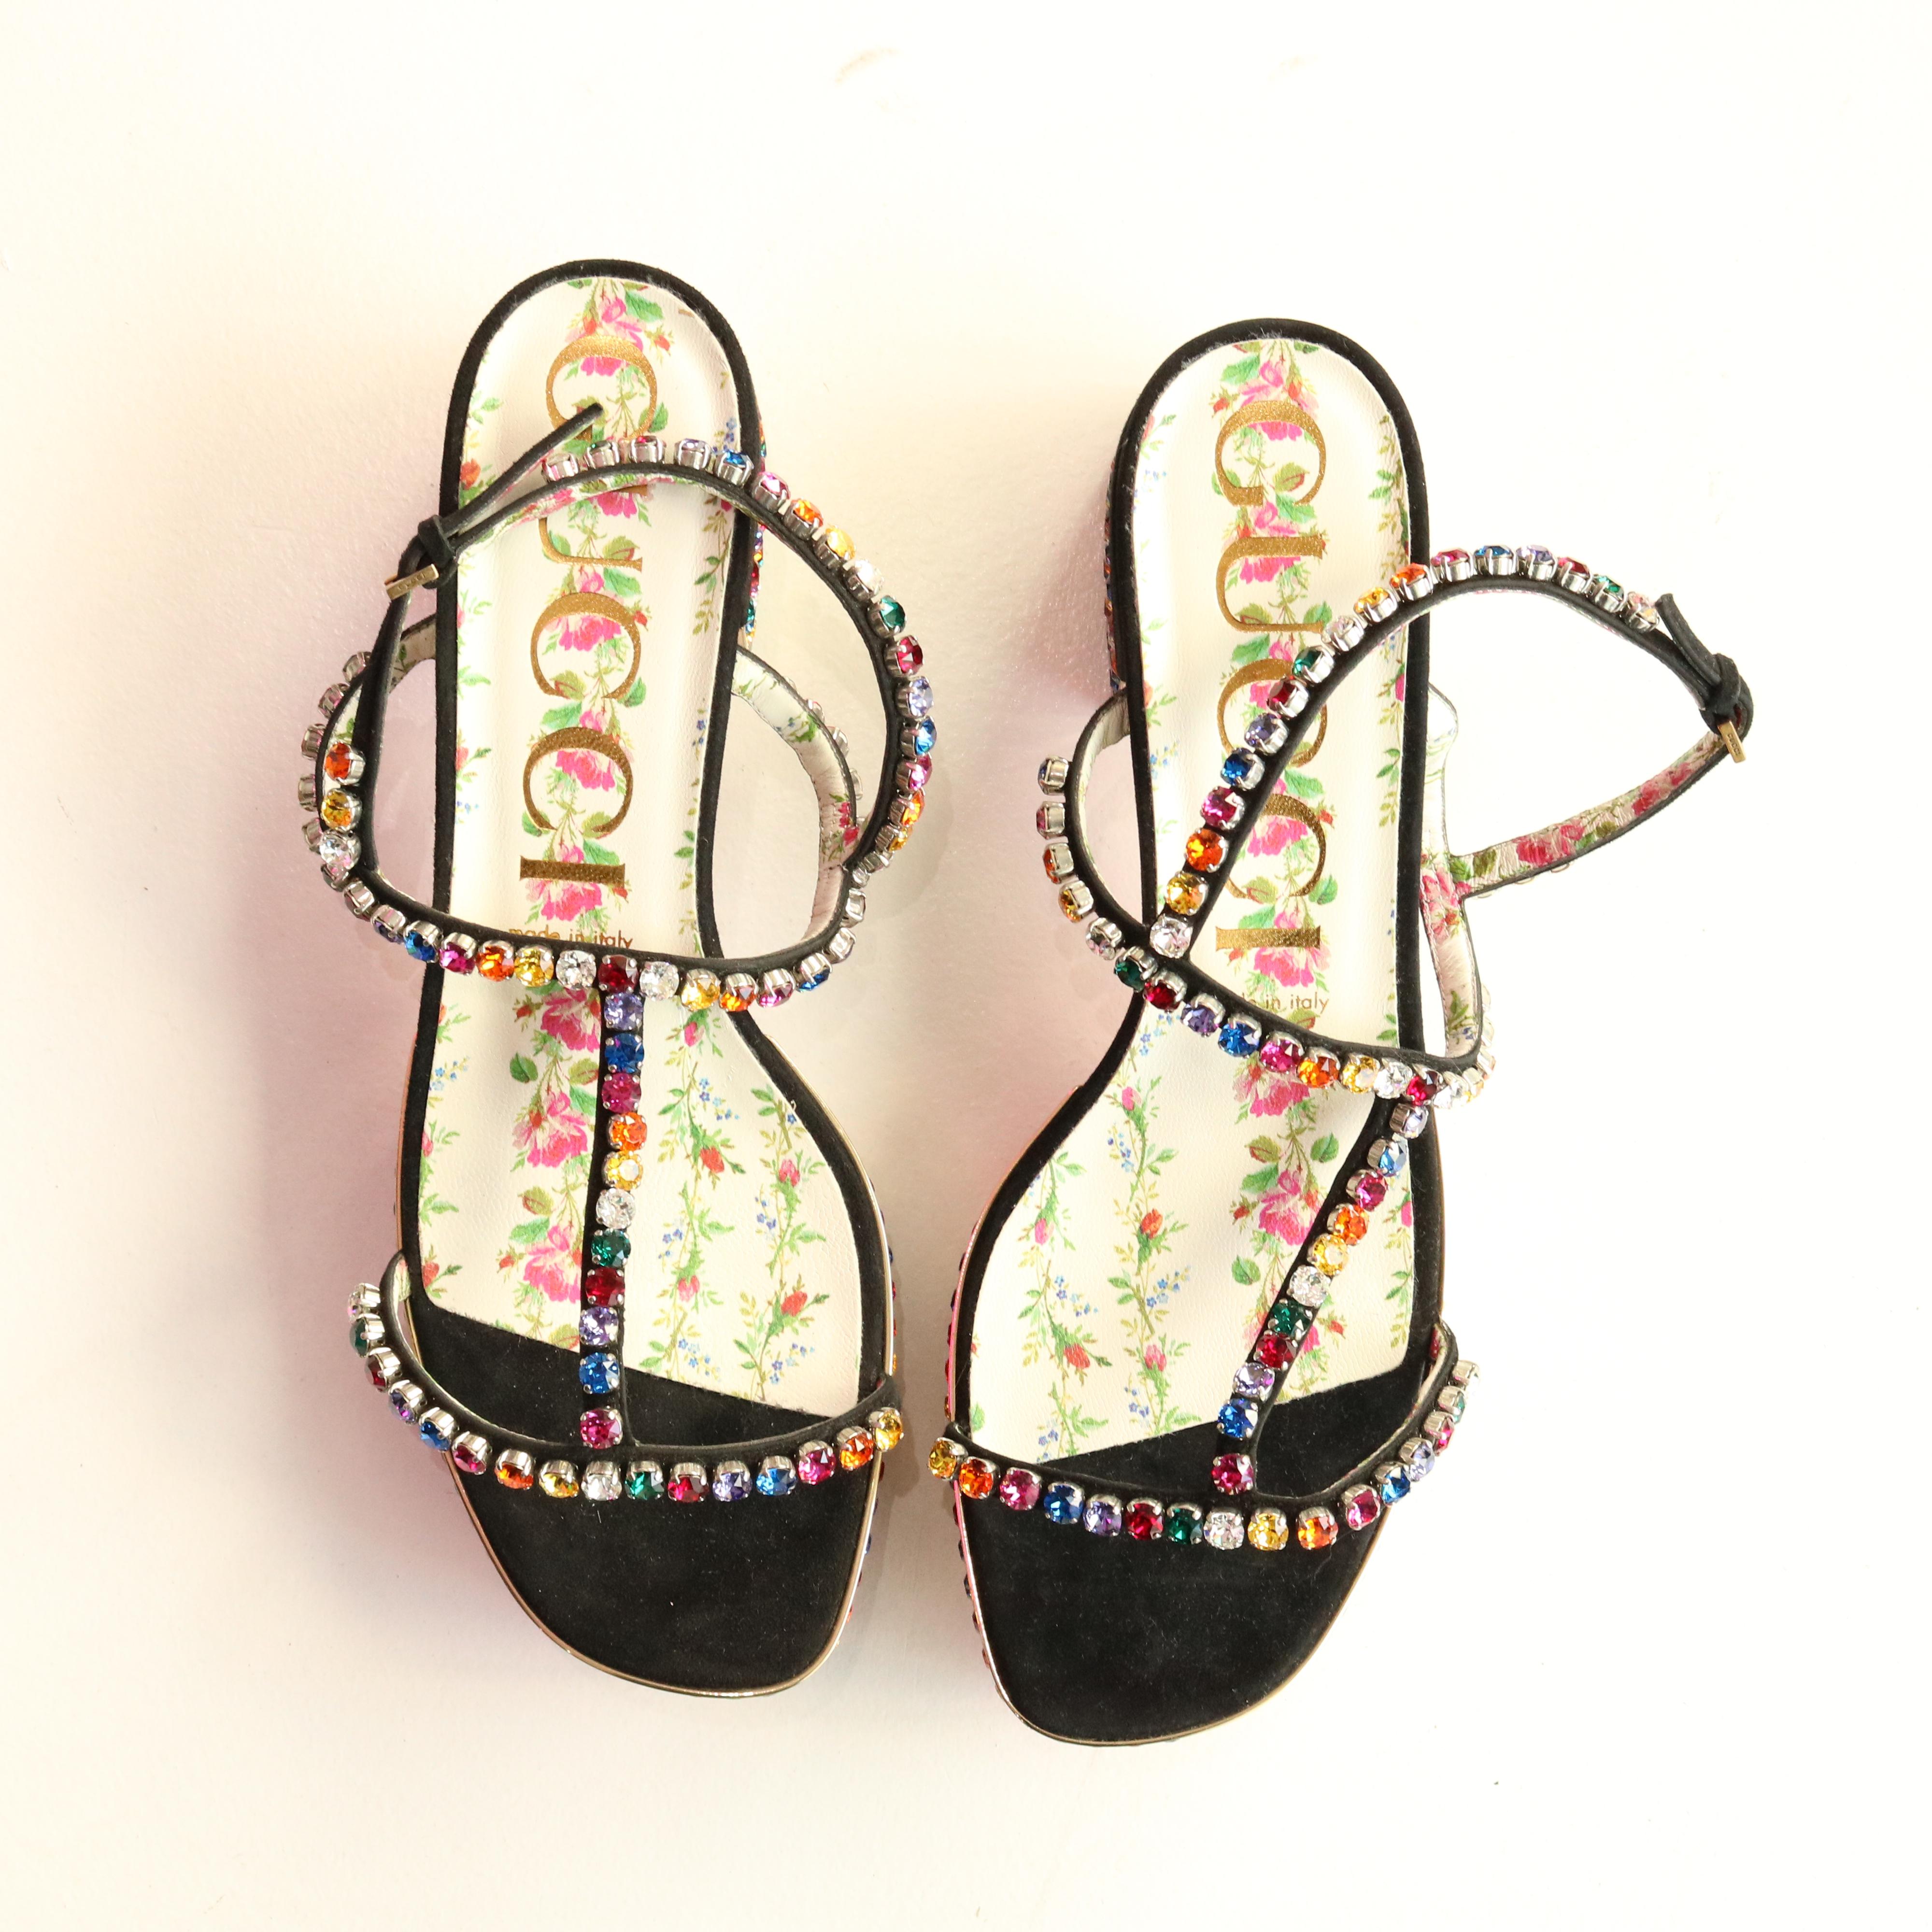 Gucci suede sandal with allover multicolor crystal embellishments.
Size 40 
2 1/2